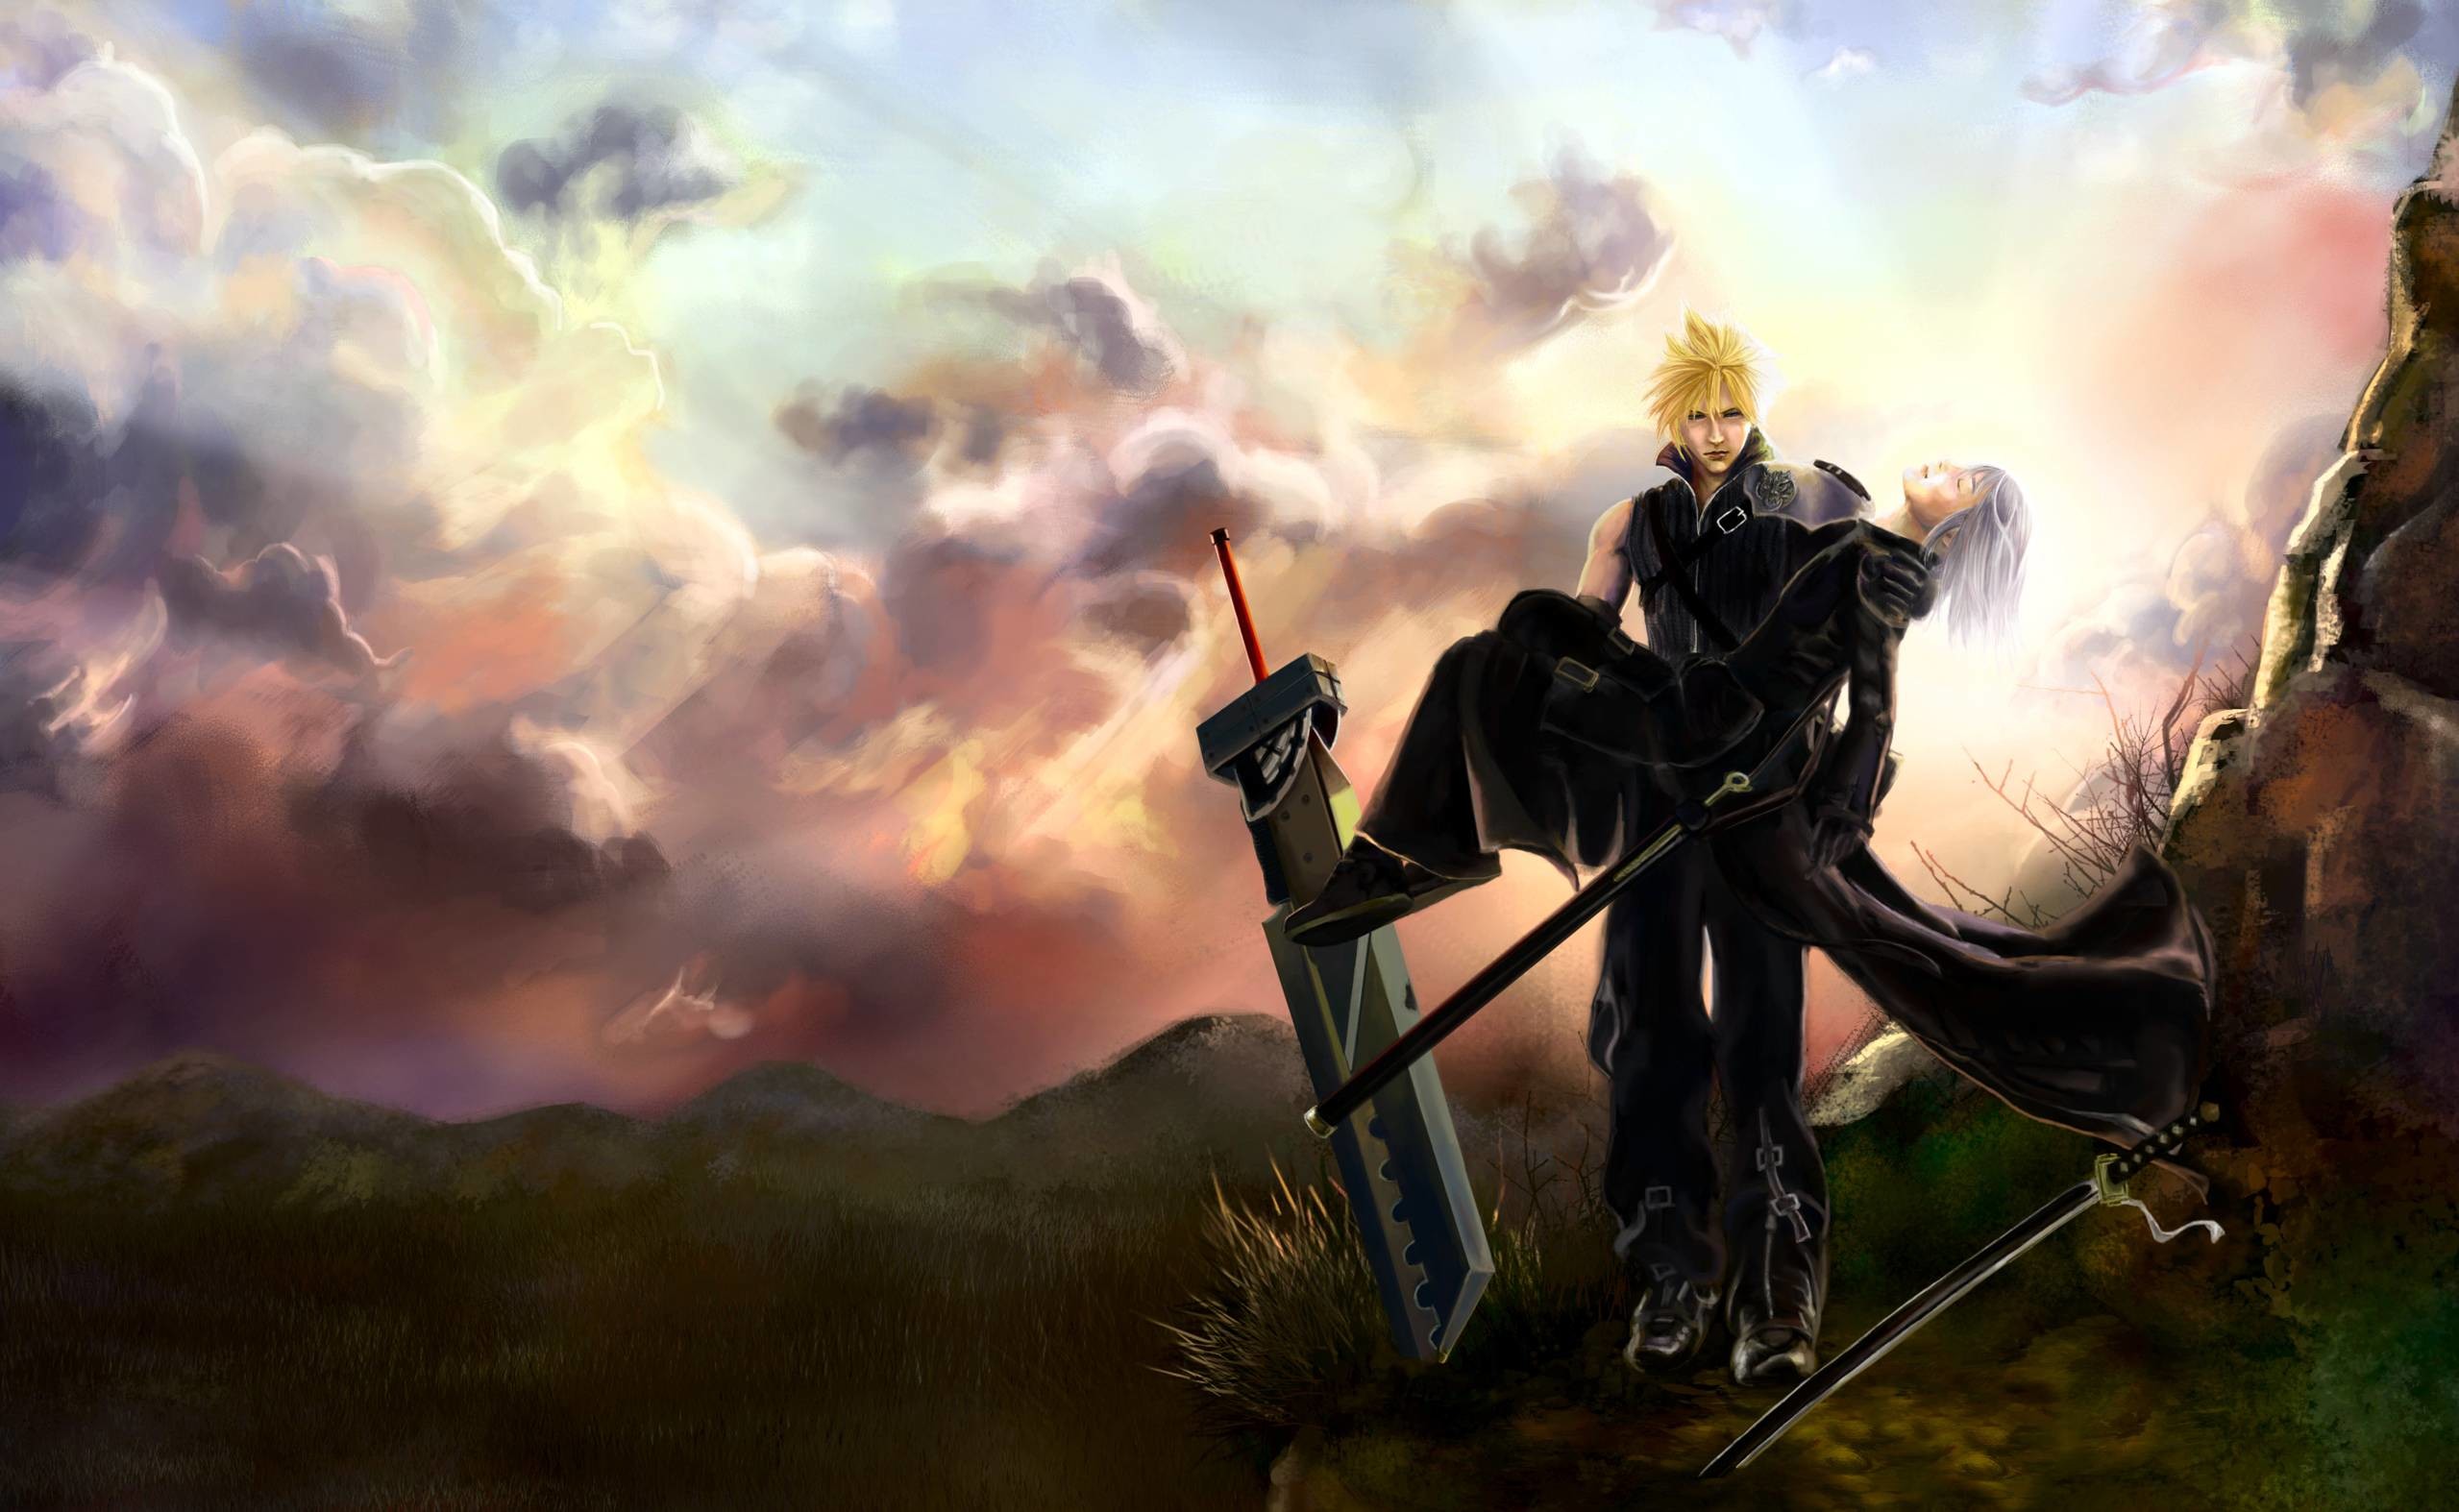 2559x1574 491 Final Fantasy Wallpapers | Final Fantasy Backgrounds Page 5